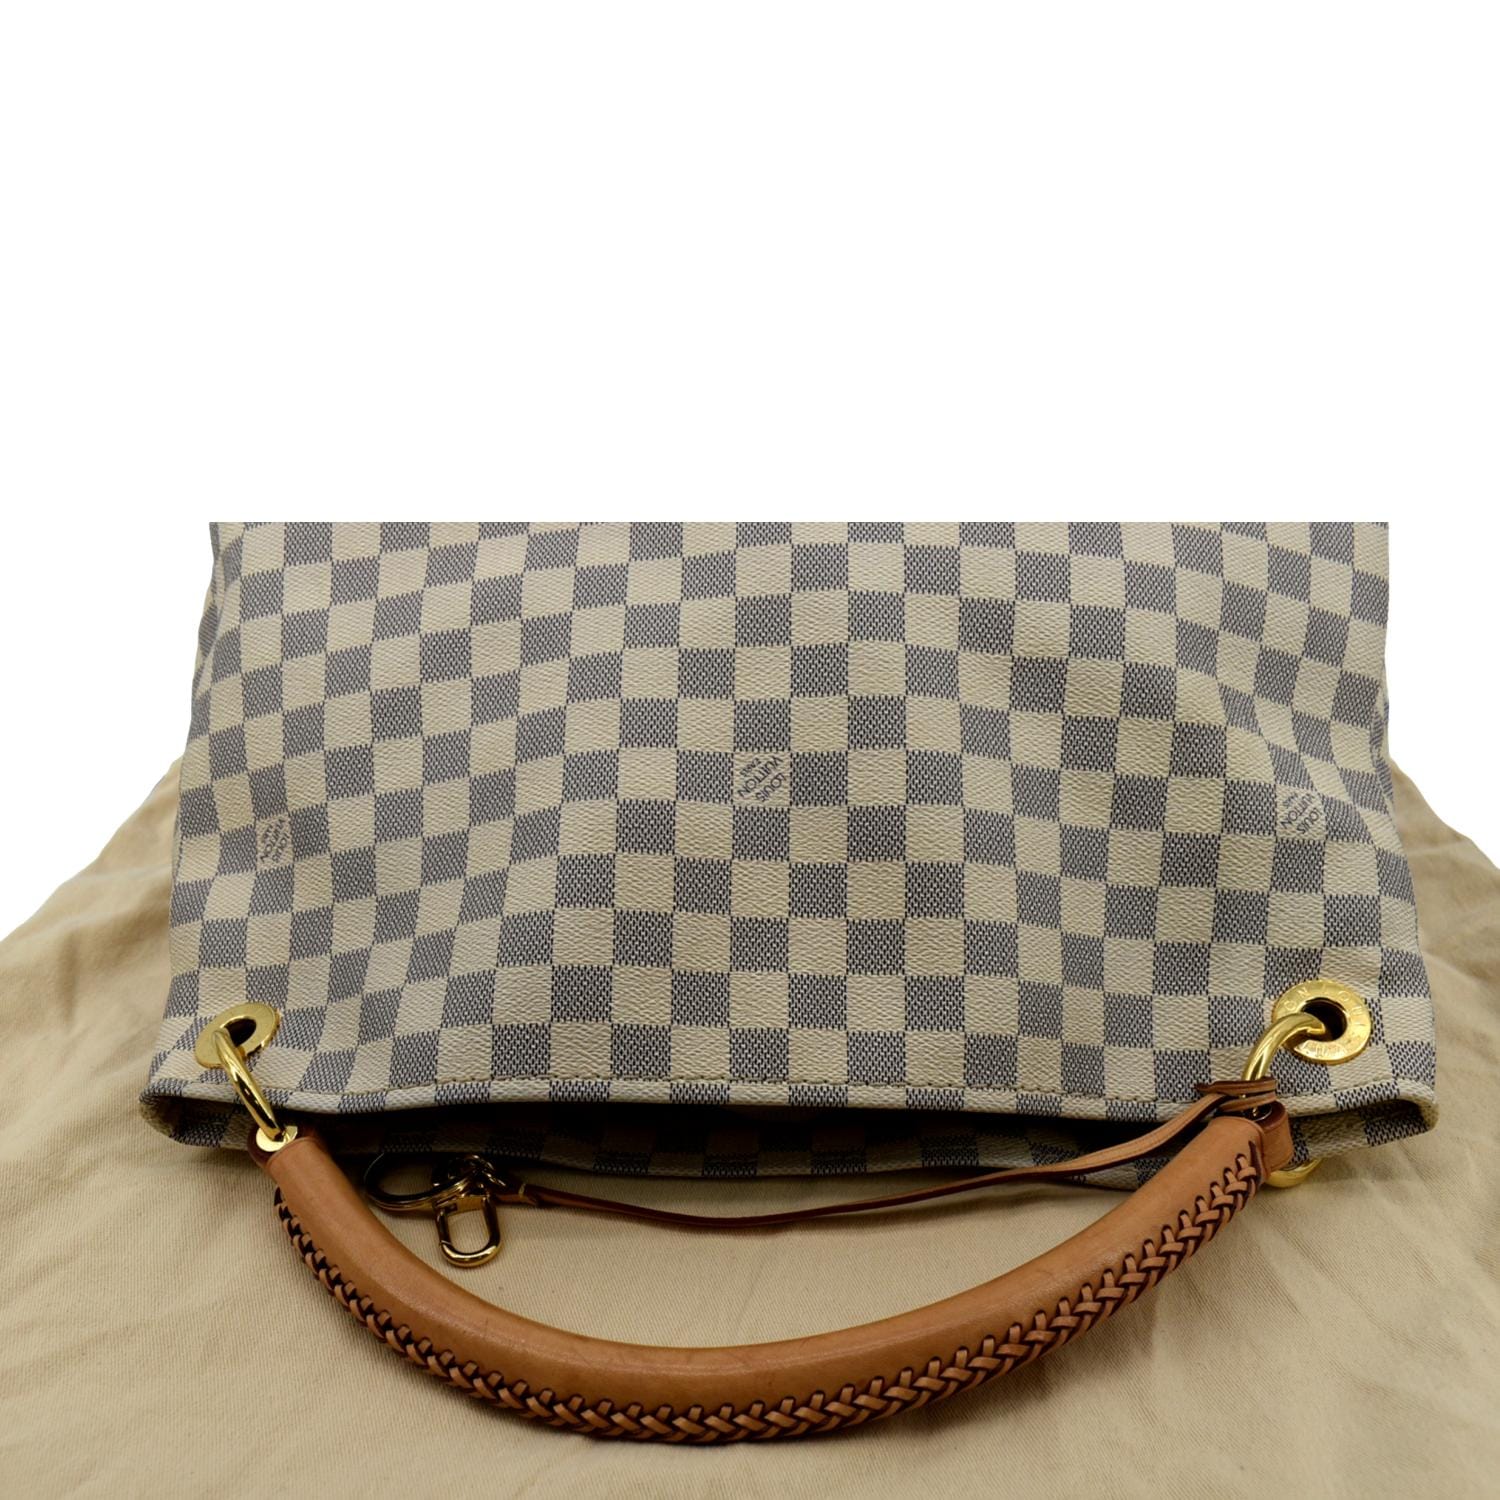 Louis Vuitton Damier Azur Artsy MM This will be my next LV  VDAY I THINK  SO!!